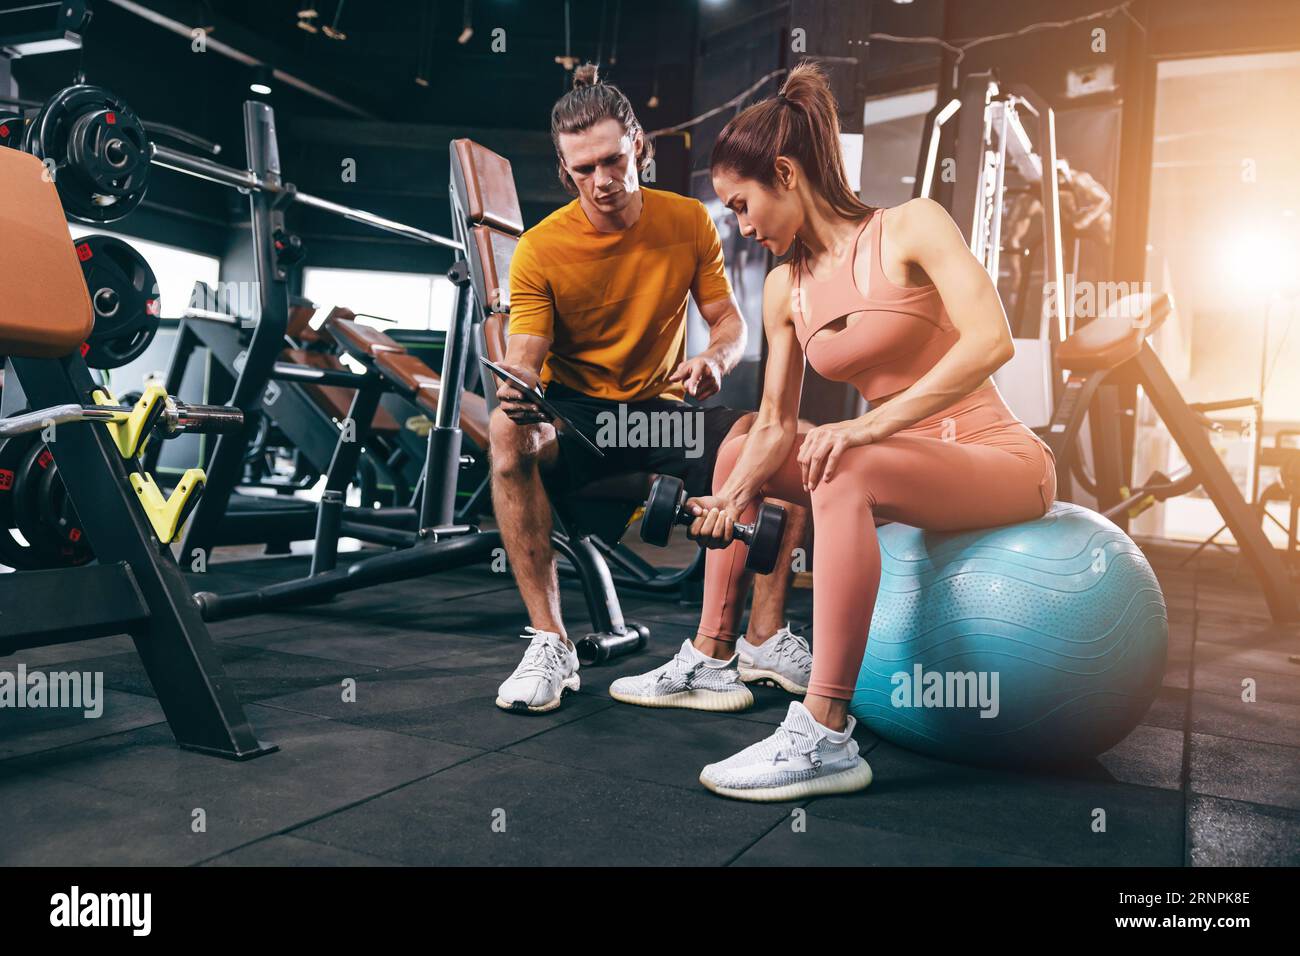 Woman practicing kettlebell squat with personal trainer at gym